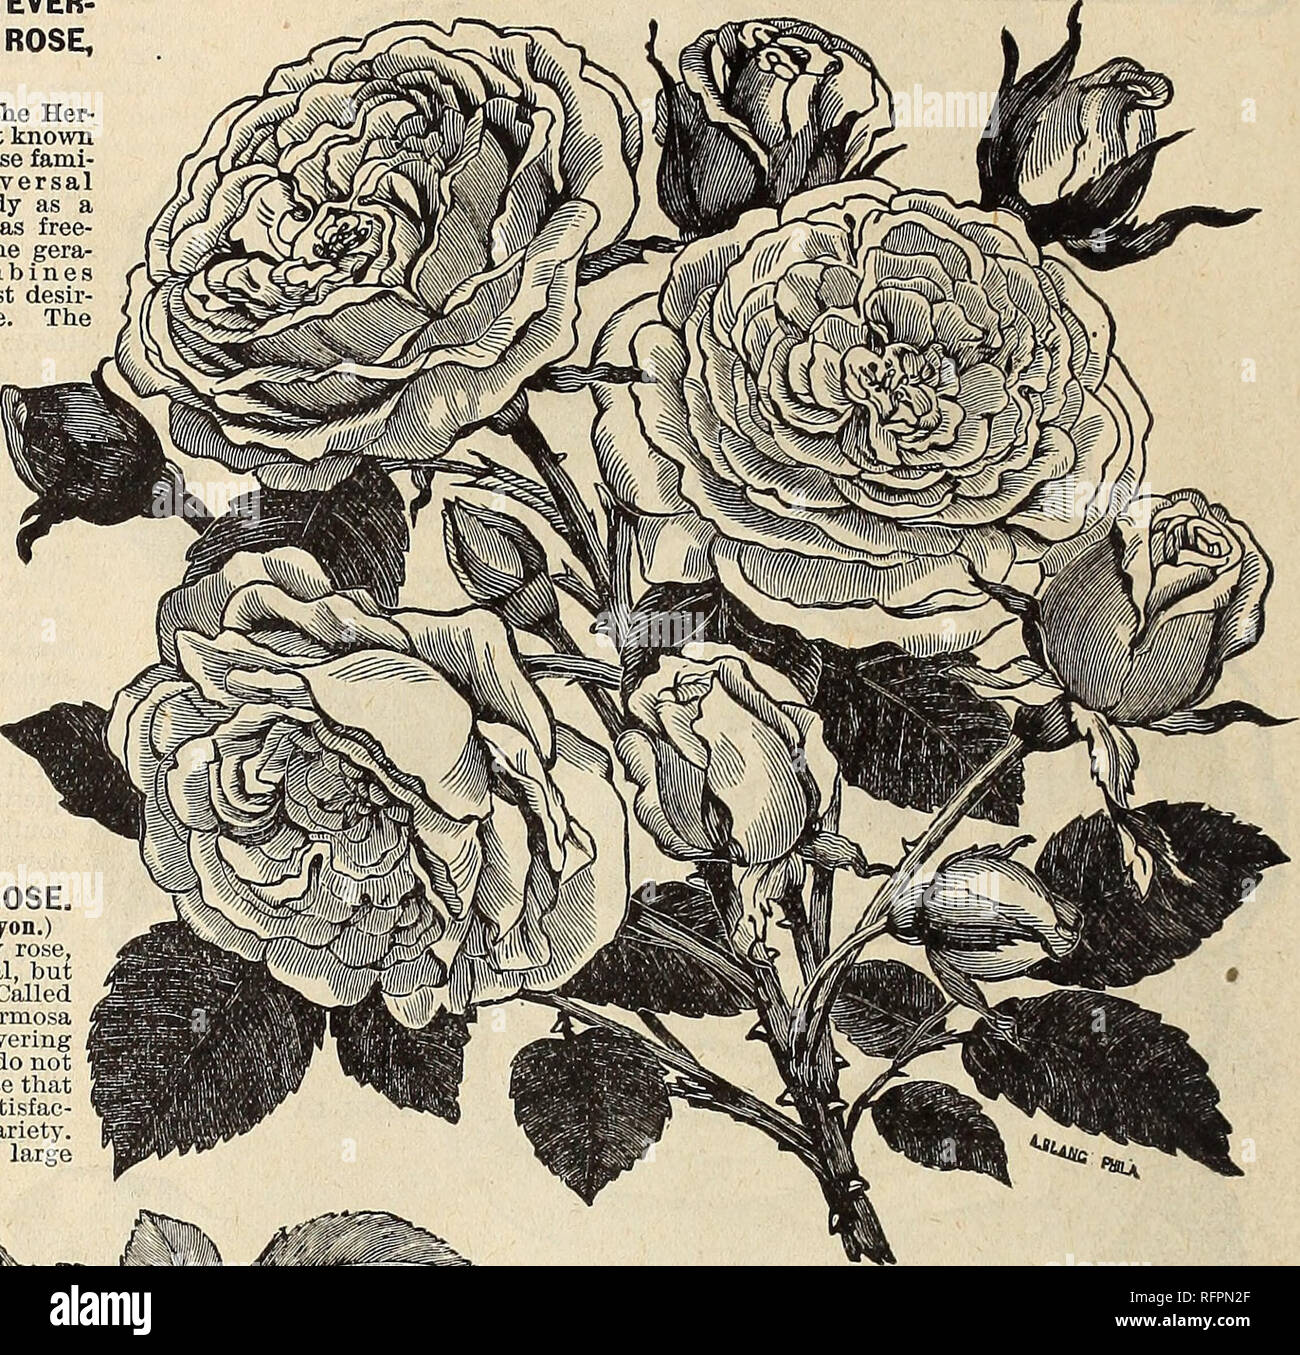 . Spring 1896. Nursery stock Ohio Catalogs; Roses Ohio Catalogs; Flowers Catalogs; Vegetables Catalogs; Nursery stock; Roses; Flowers; Vegetables. 16 THE NATIONAL PLANT COMPANY, FLORISTS, DAYTON, OHIO. A PAGE OF TH6 FINEST REDDING HOSQS. THE OLD EVER- BLOOMING ROSE, HERMOSA. We believe the Her- mosa is the best known in the entire rose fami- ly, and a universal favorite. Hardy as a lilac bush and as free- flowering as the gera- nium, it combines everything most desir- able in a rose. The flower is cupped, finely f o rm e d and full; color the most pleasing shade of pink, soft, but deep and ver Stock Photo